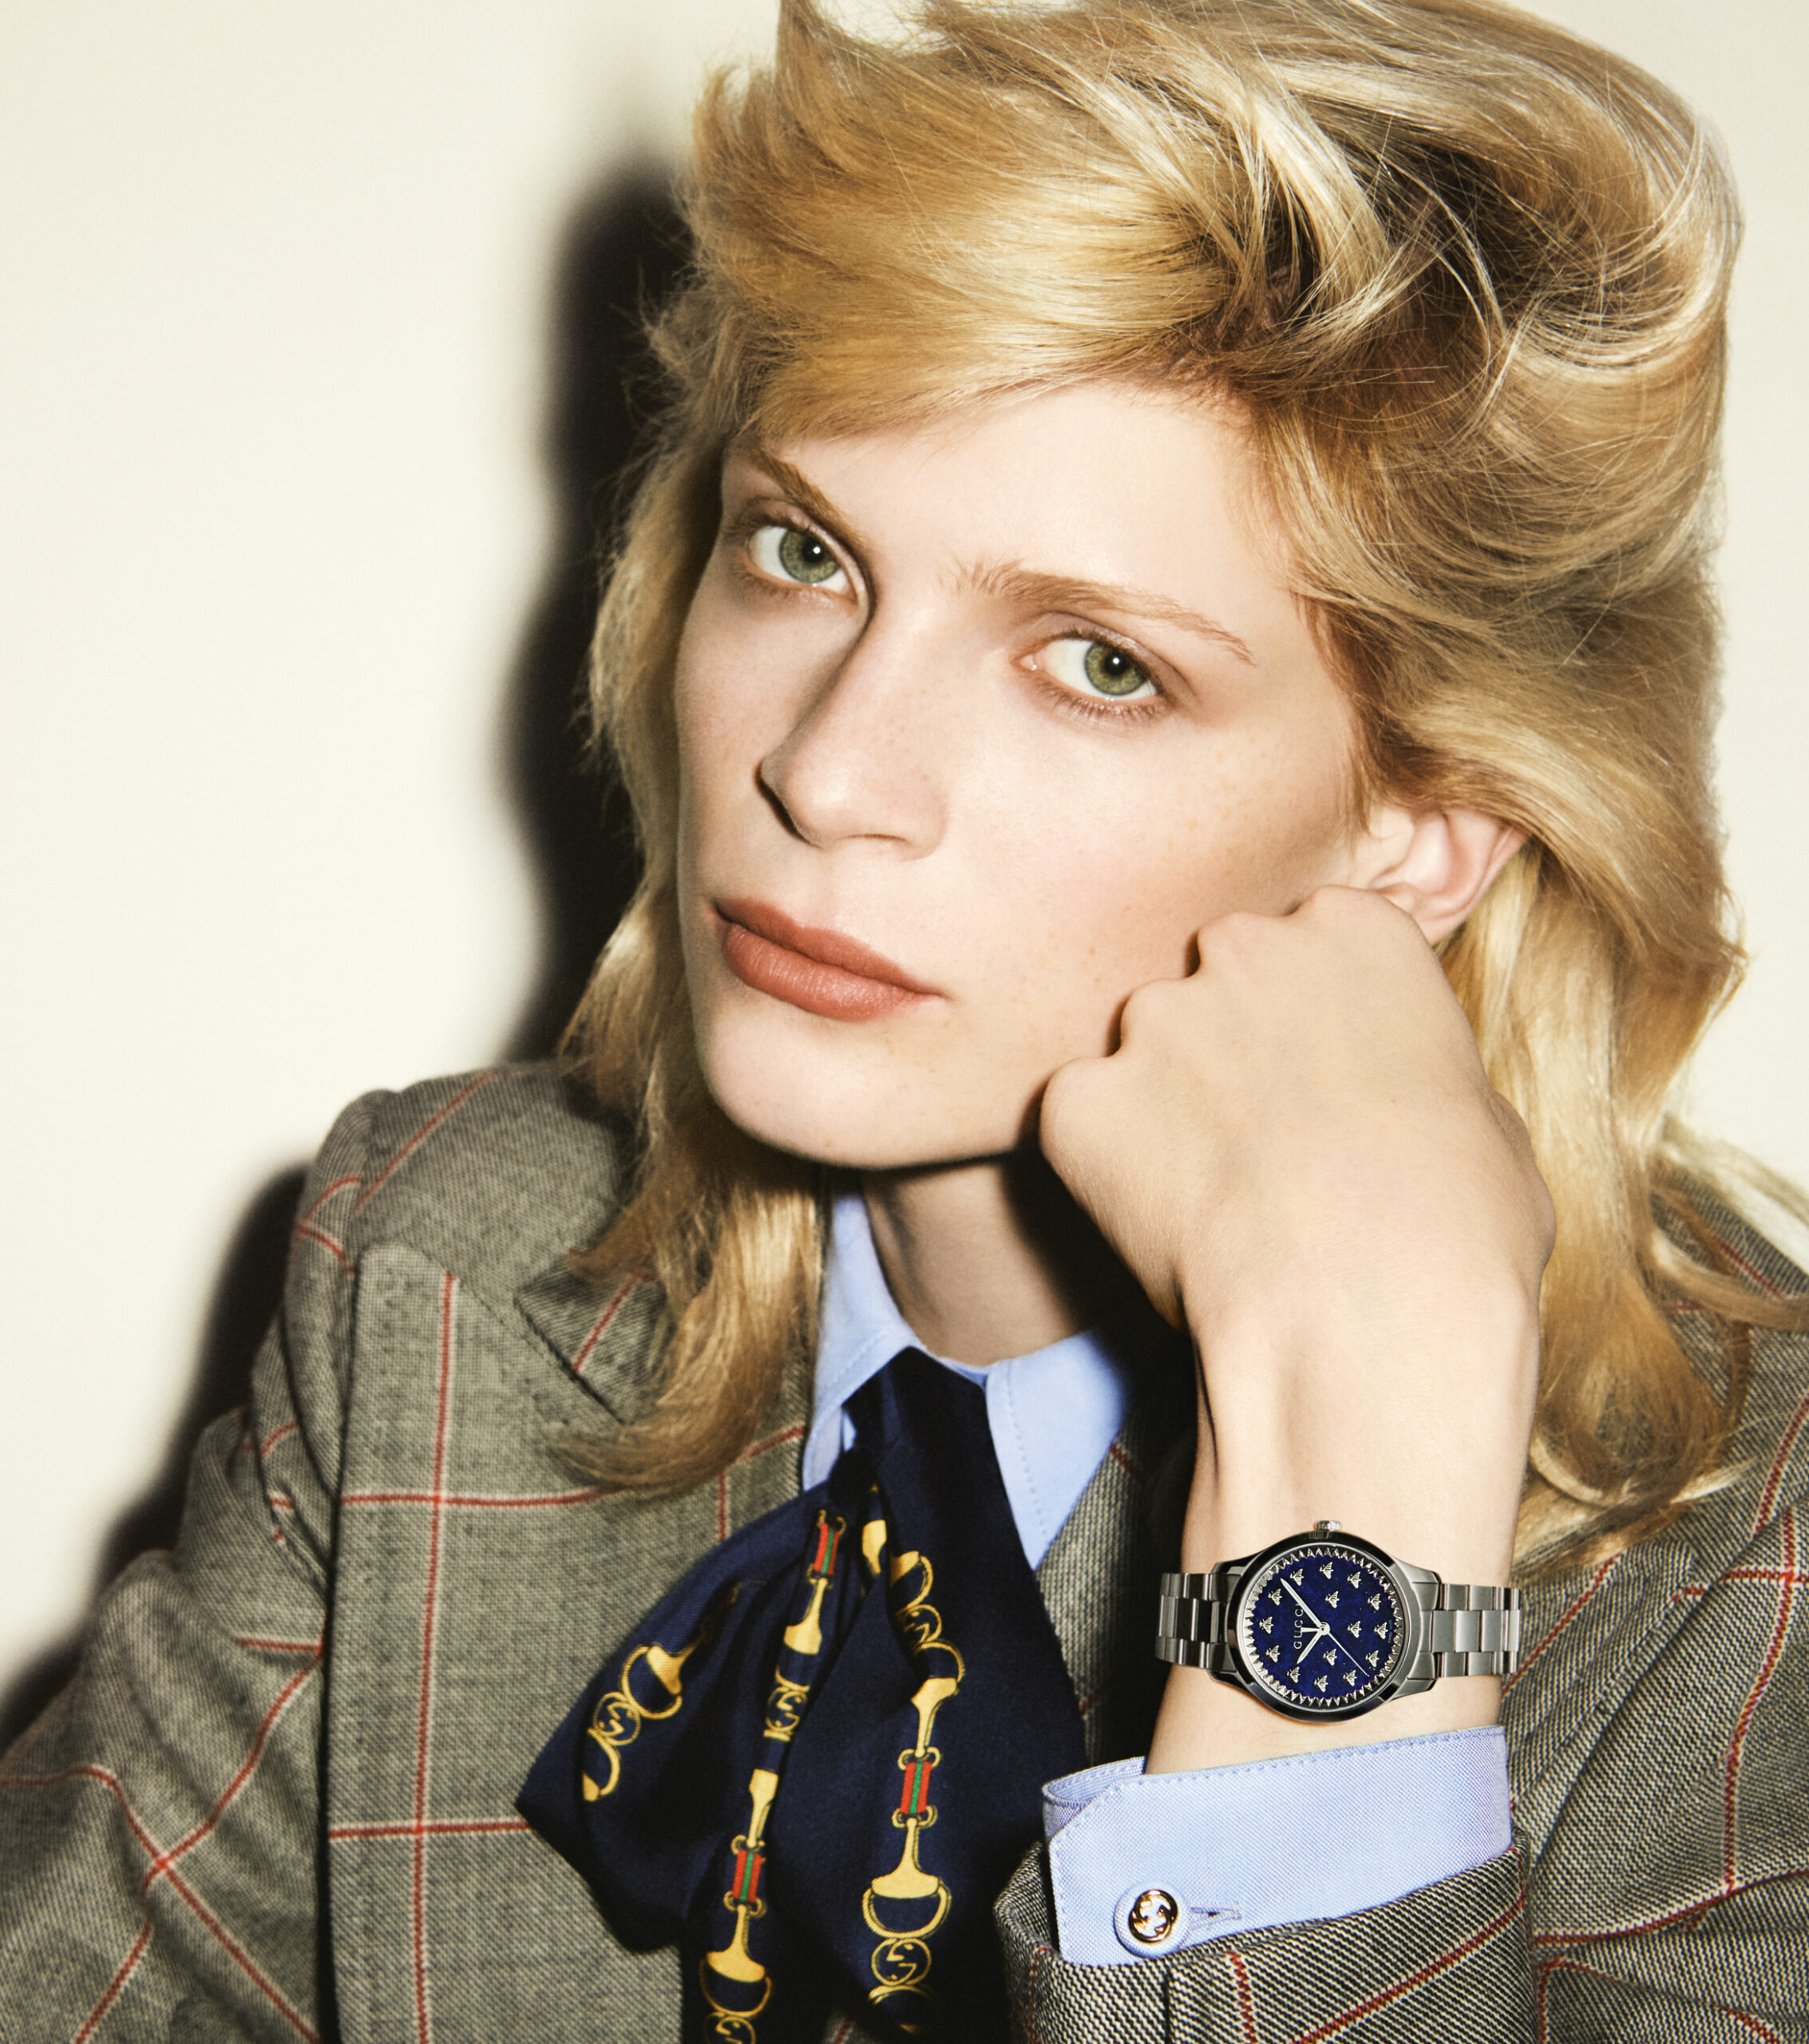 There's No Time Like The Present For Gucci's New Timepiece and